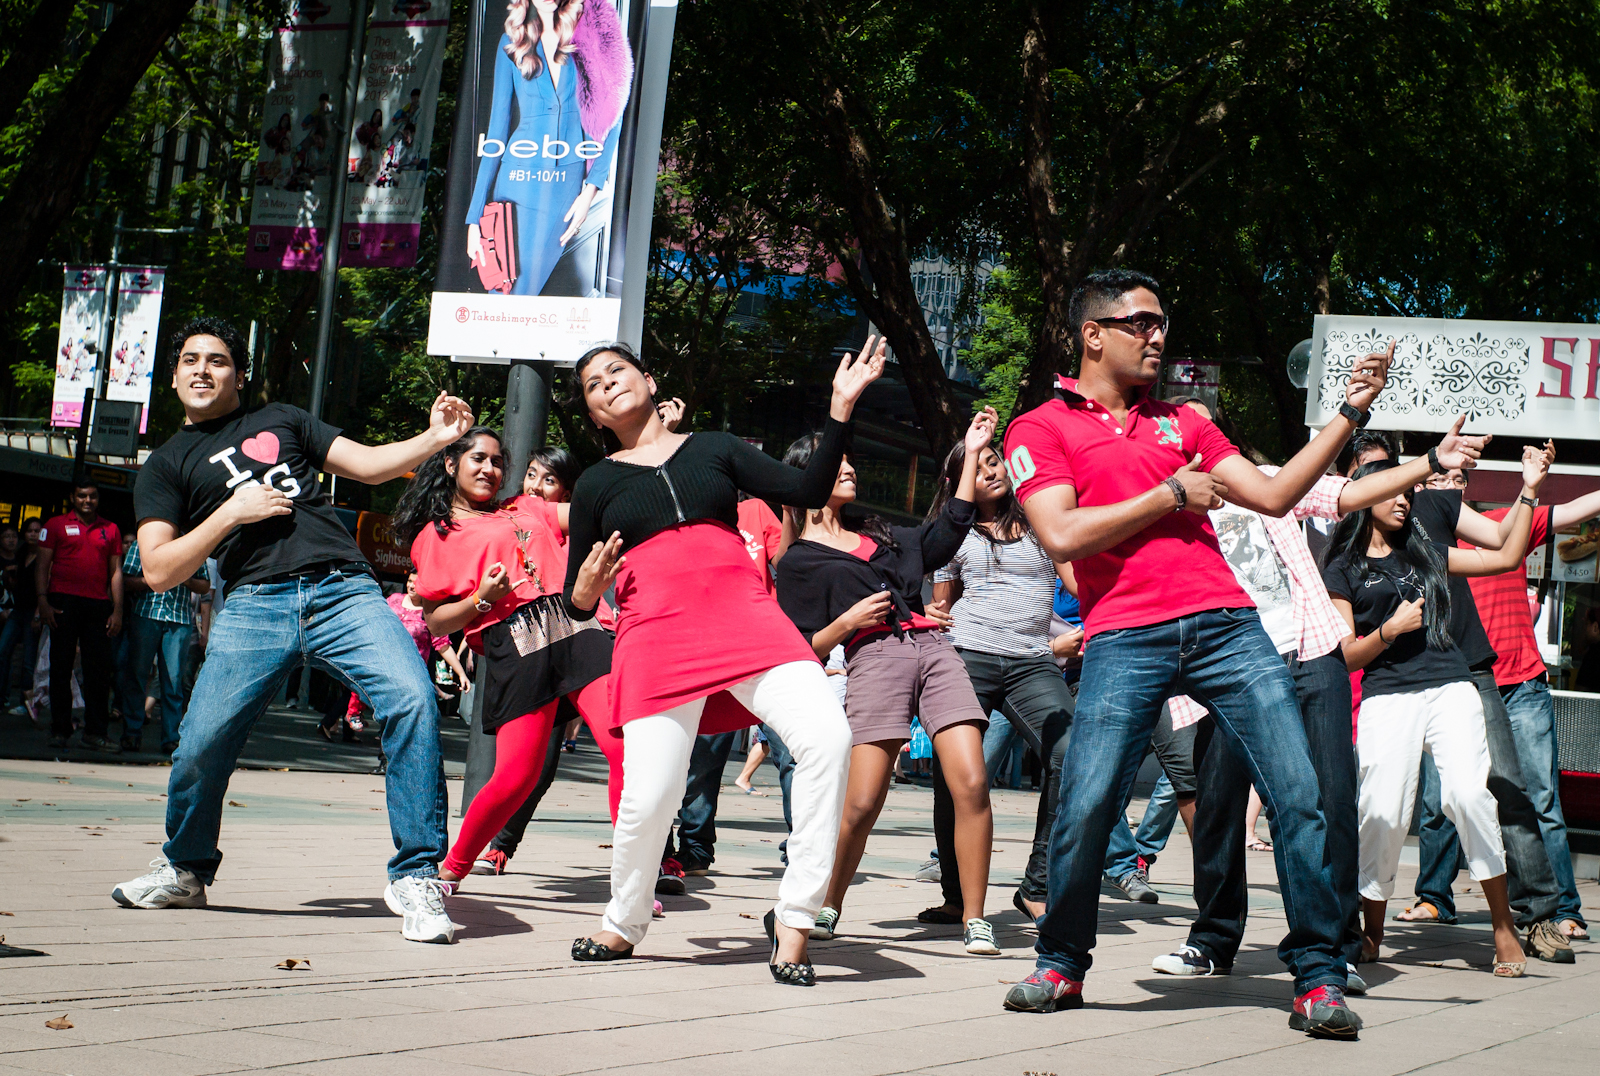 A group of Indian dancers in a flash mob along Orchard Road